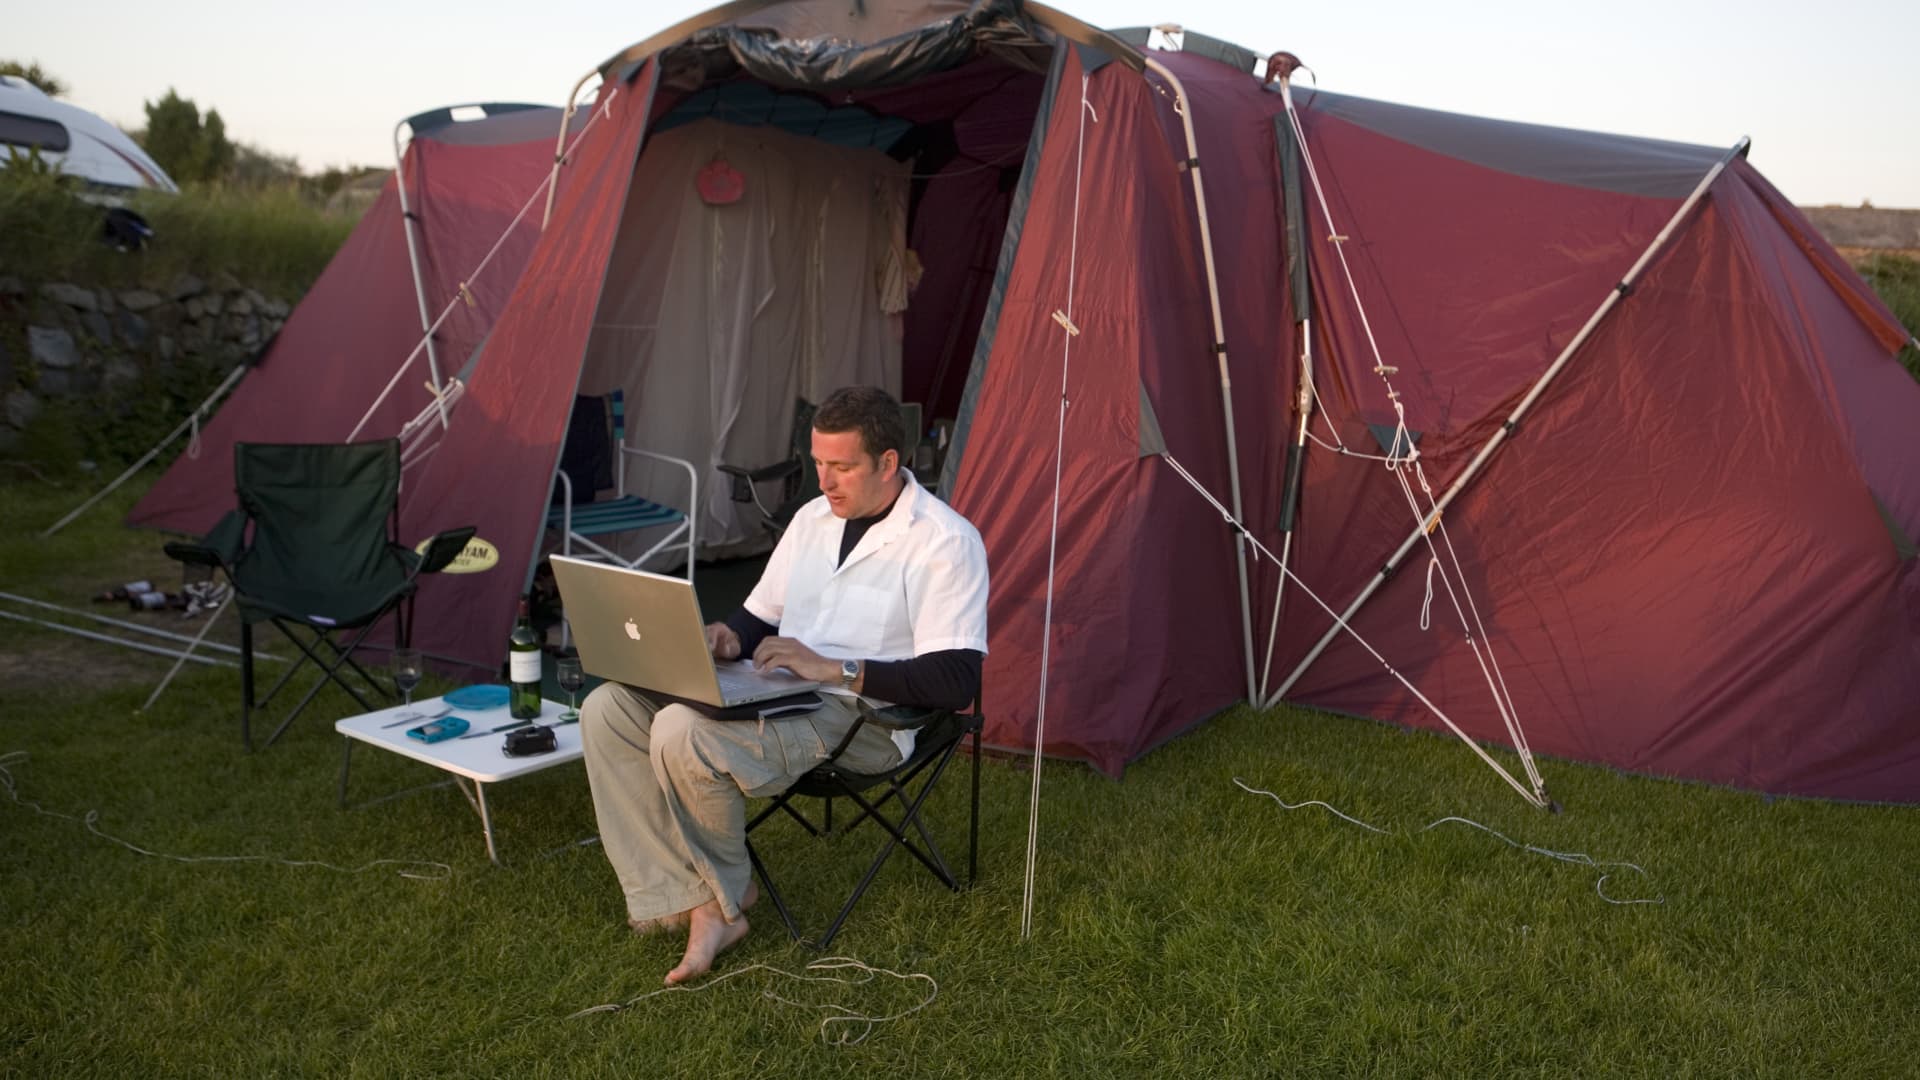 A camper takes some time to work on his laptop while on a family camping holiday.